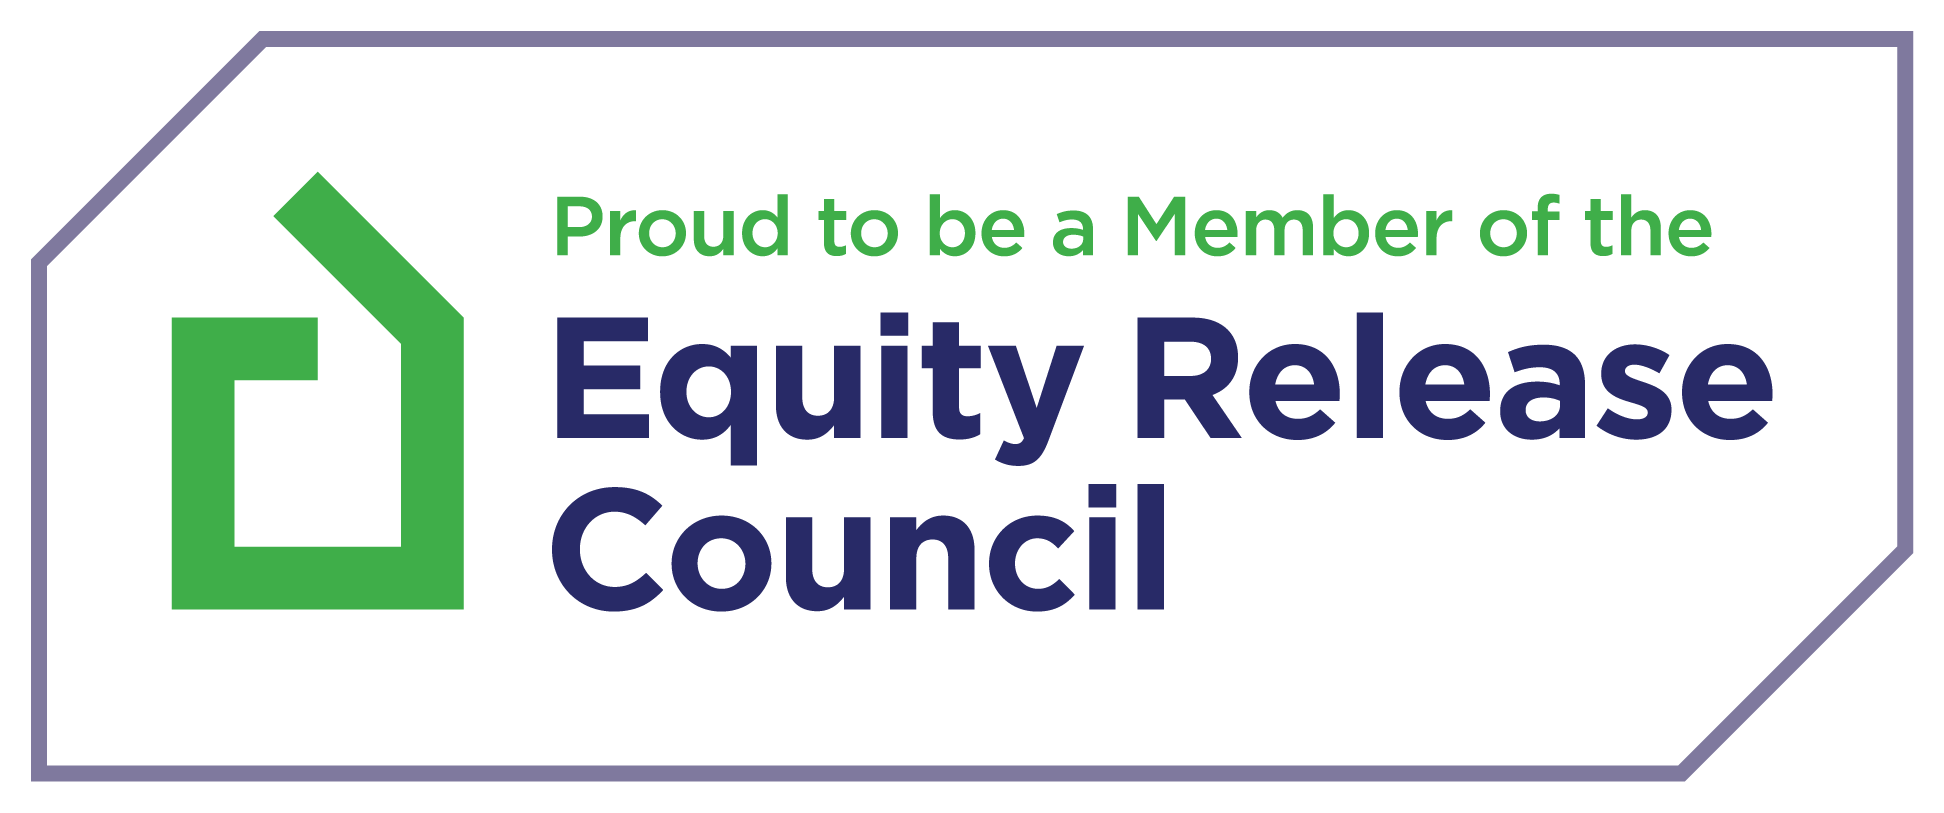 The Equity Release Council